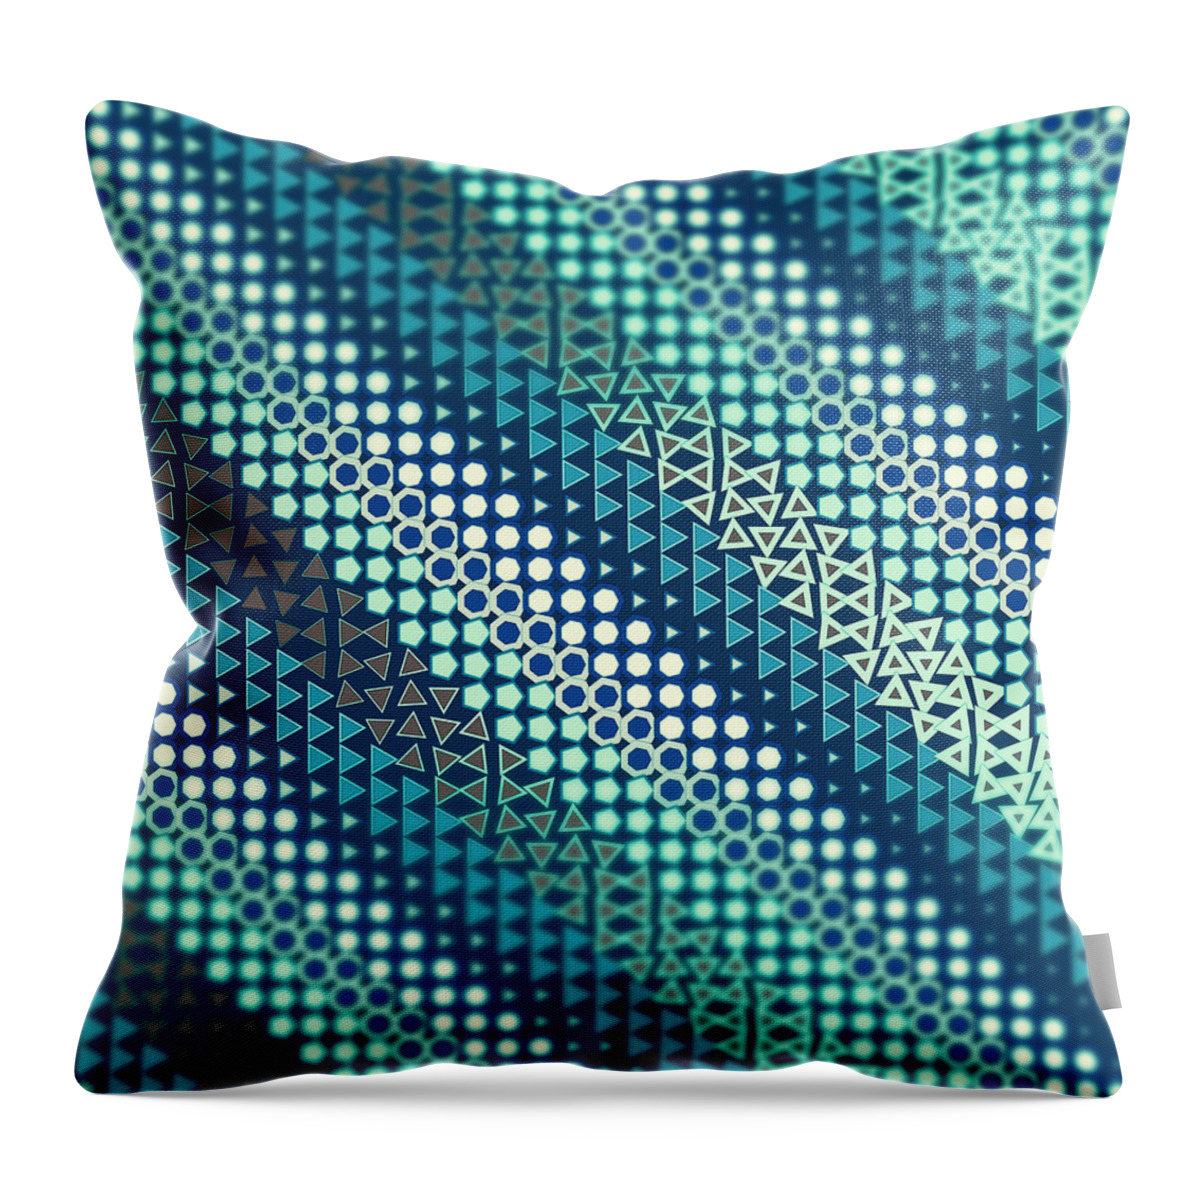 Abstract Throw Pillow featuring the digital art Pattern 1 by Marko Sabotin